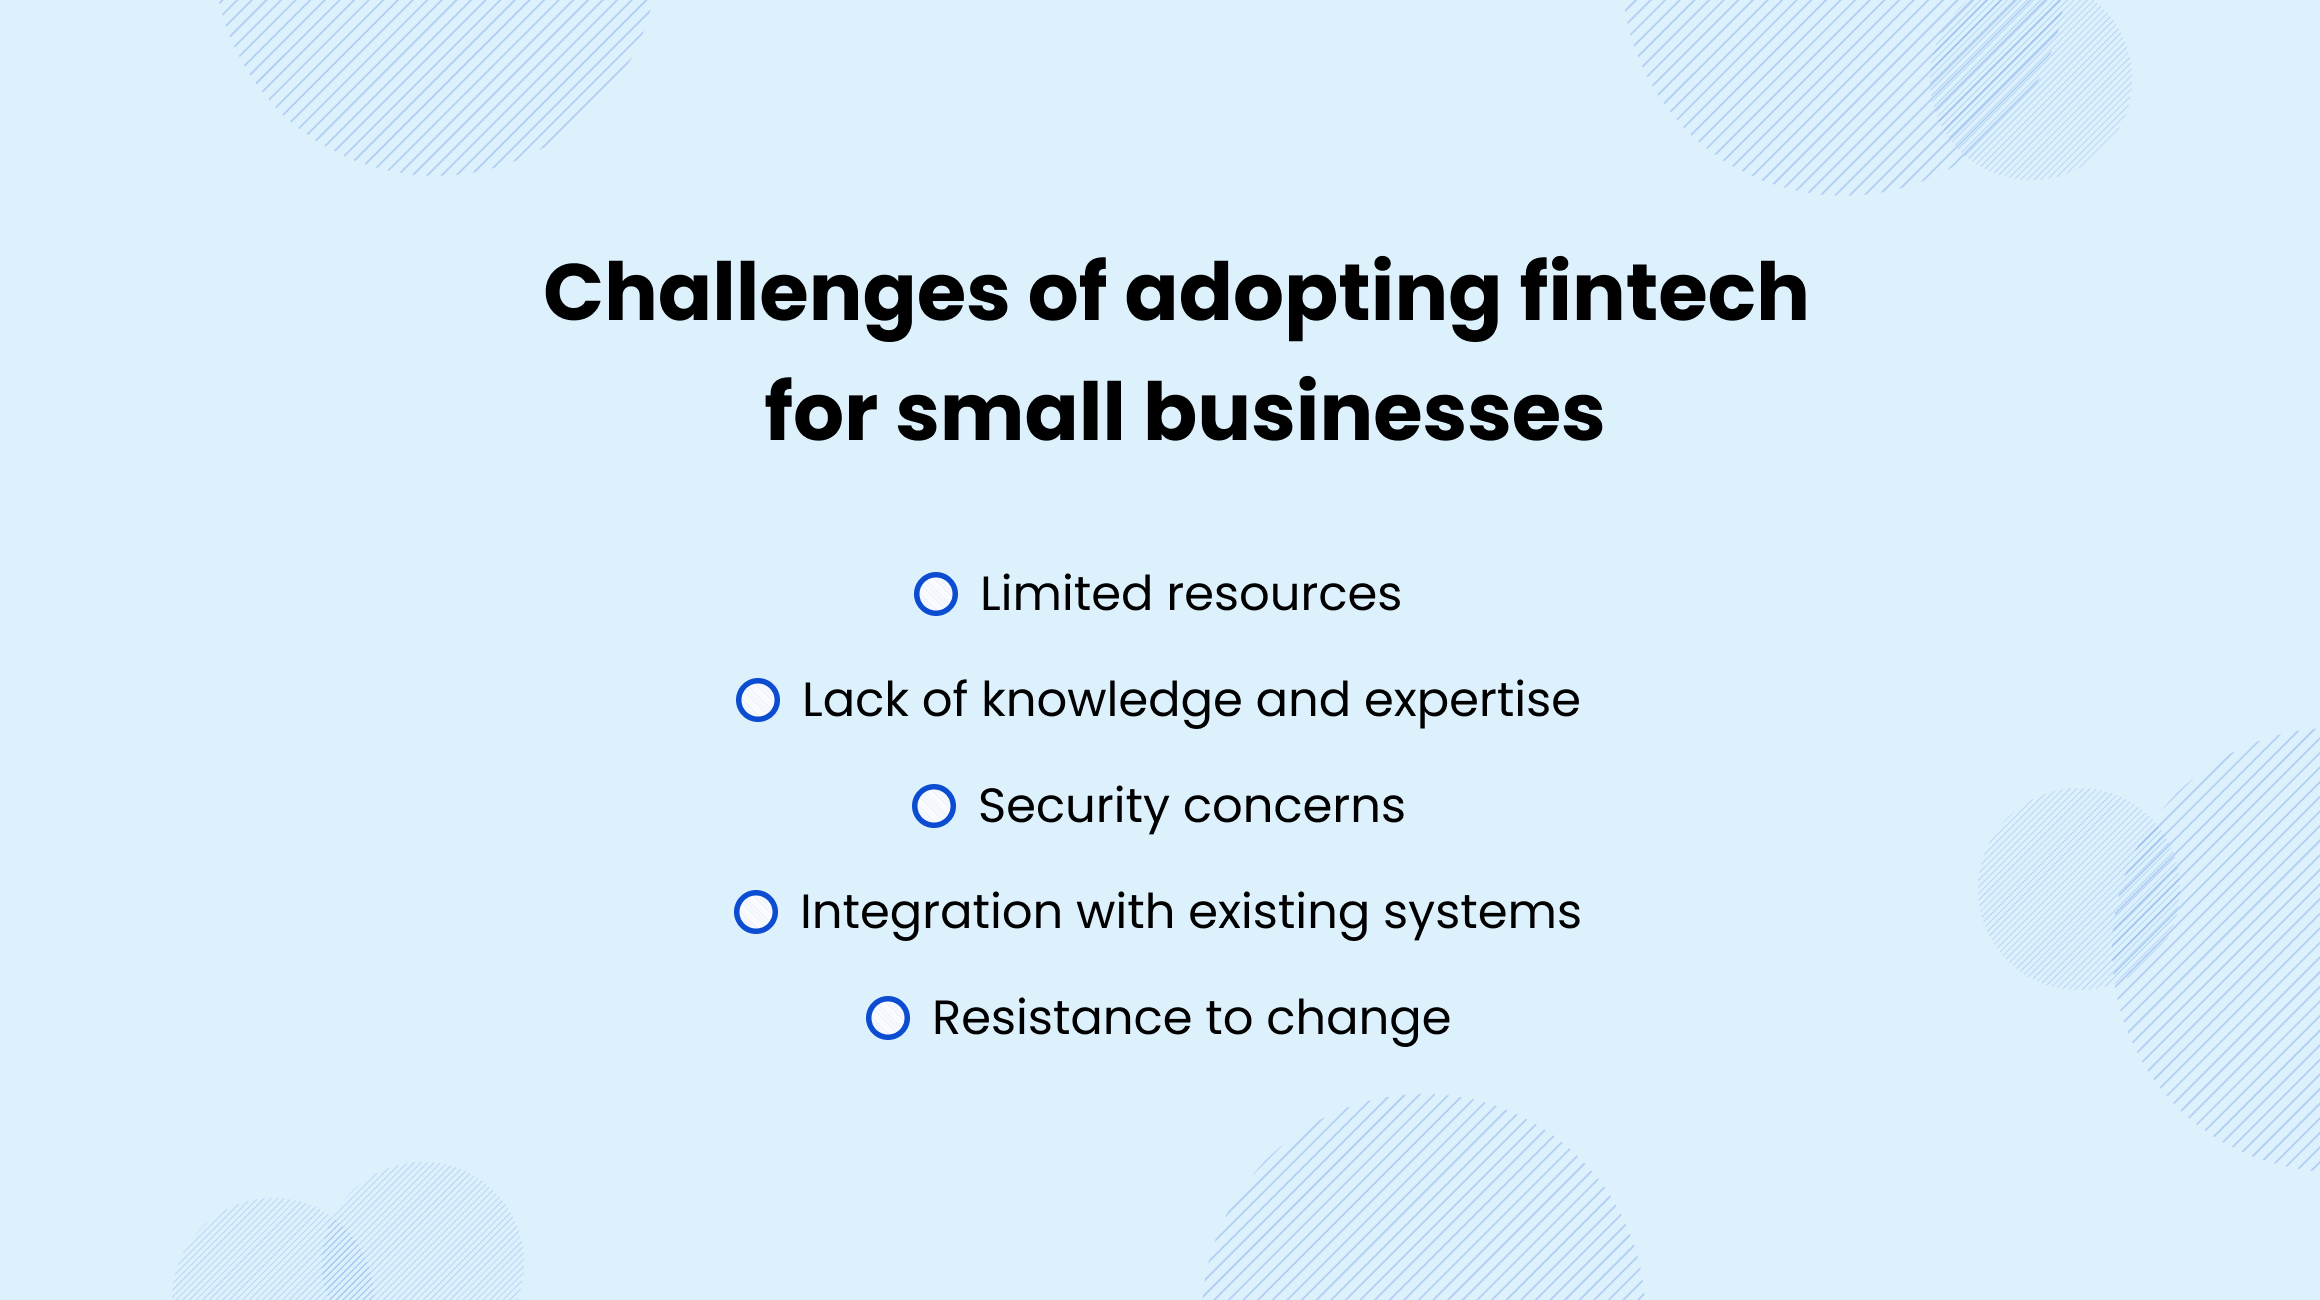 Challenges of Adopting Fintech for Small Business